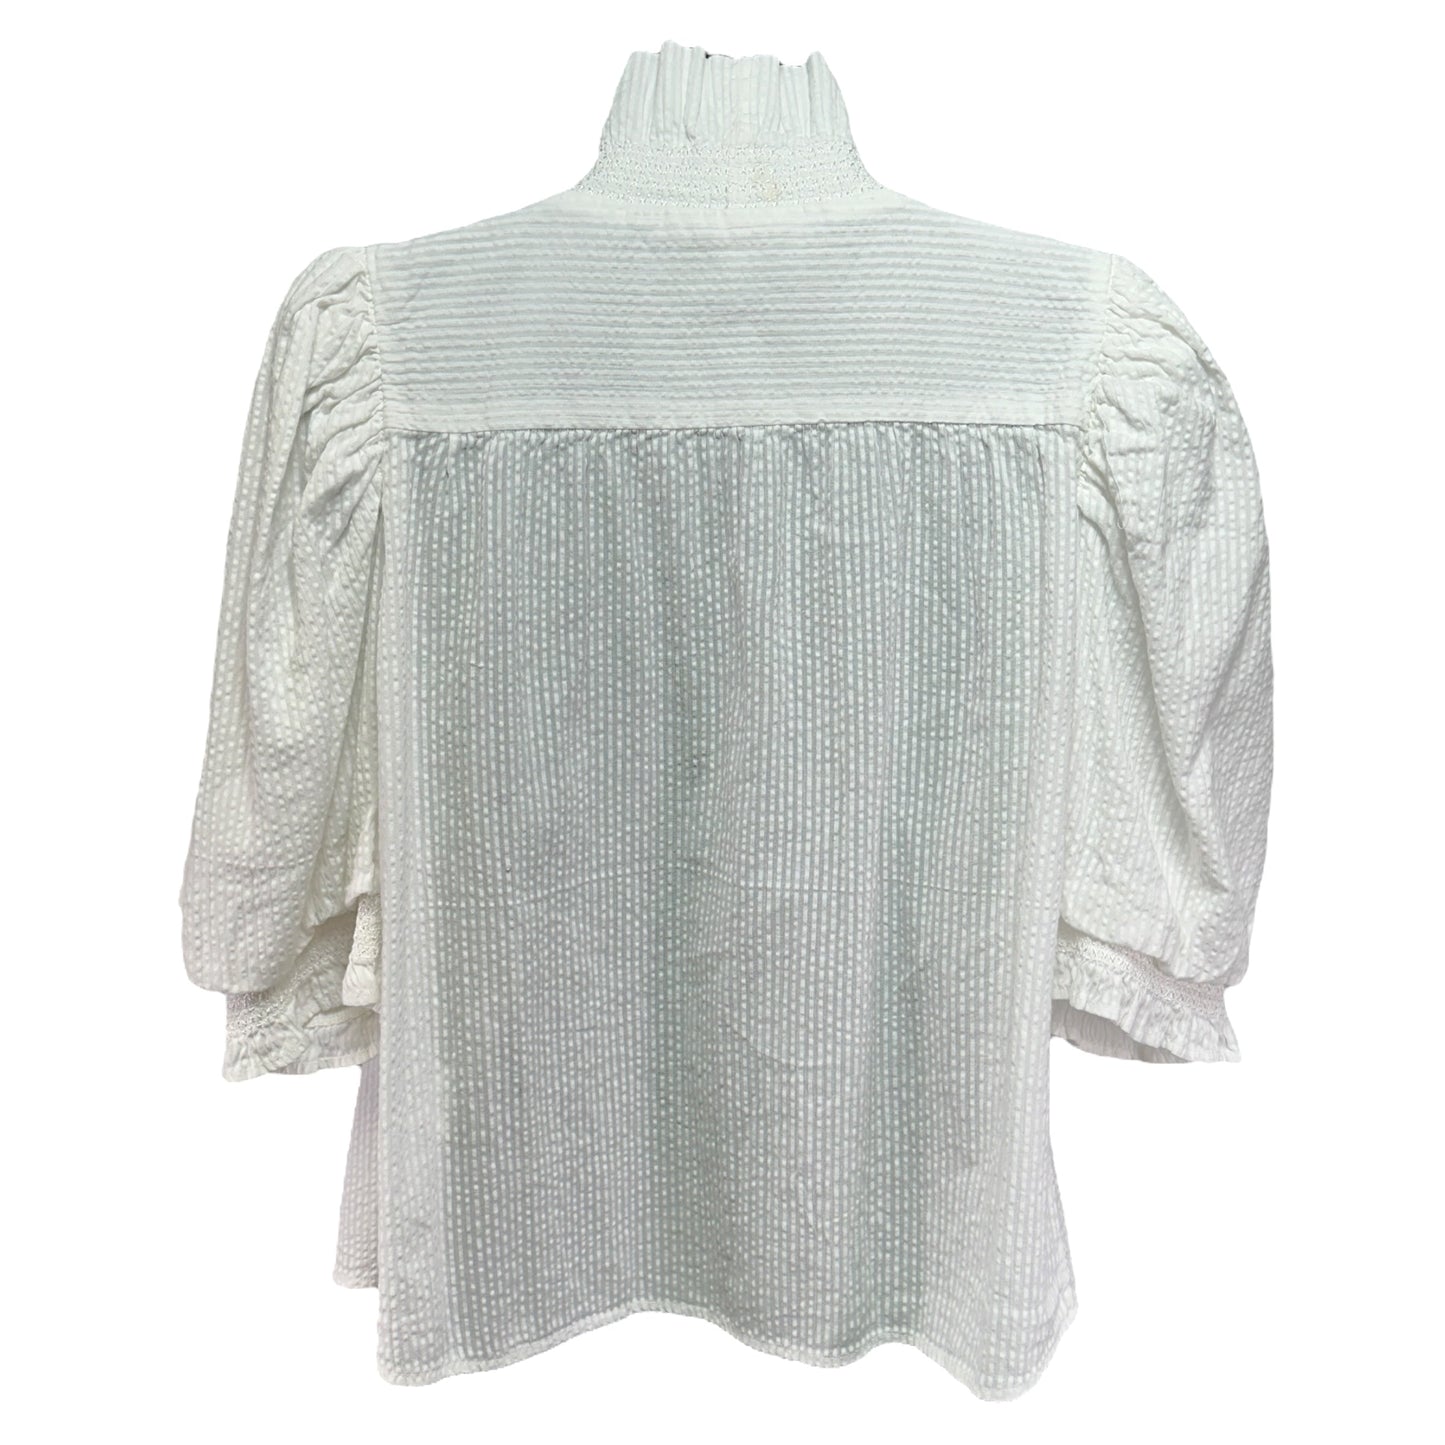 Zuri Top Short Sleeve Love The Label, Size L